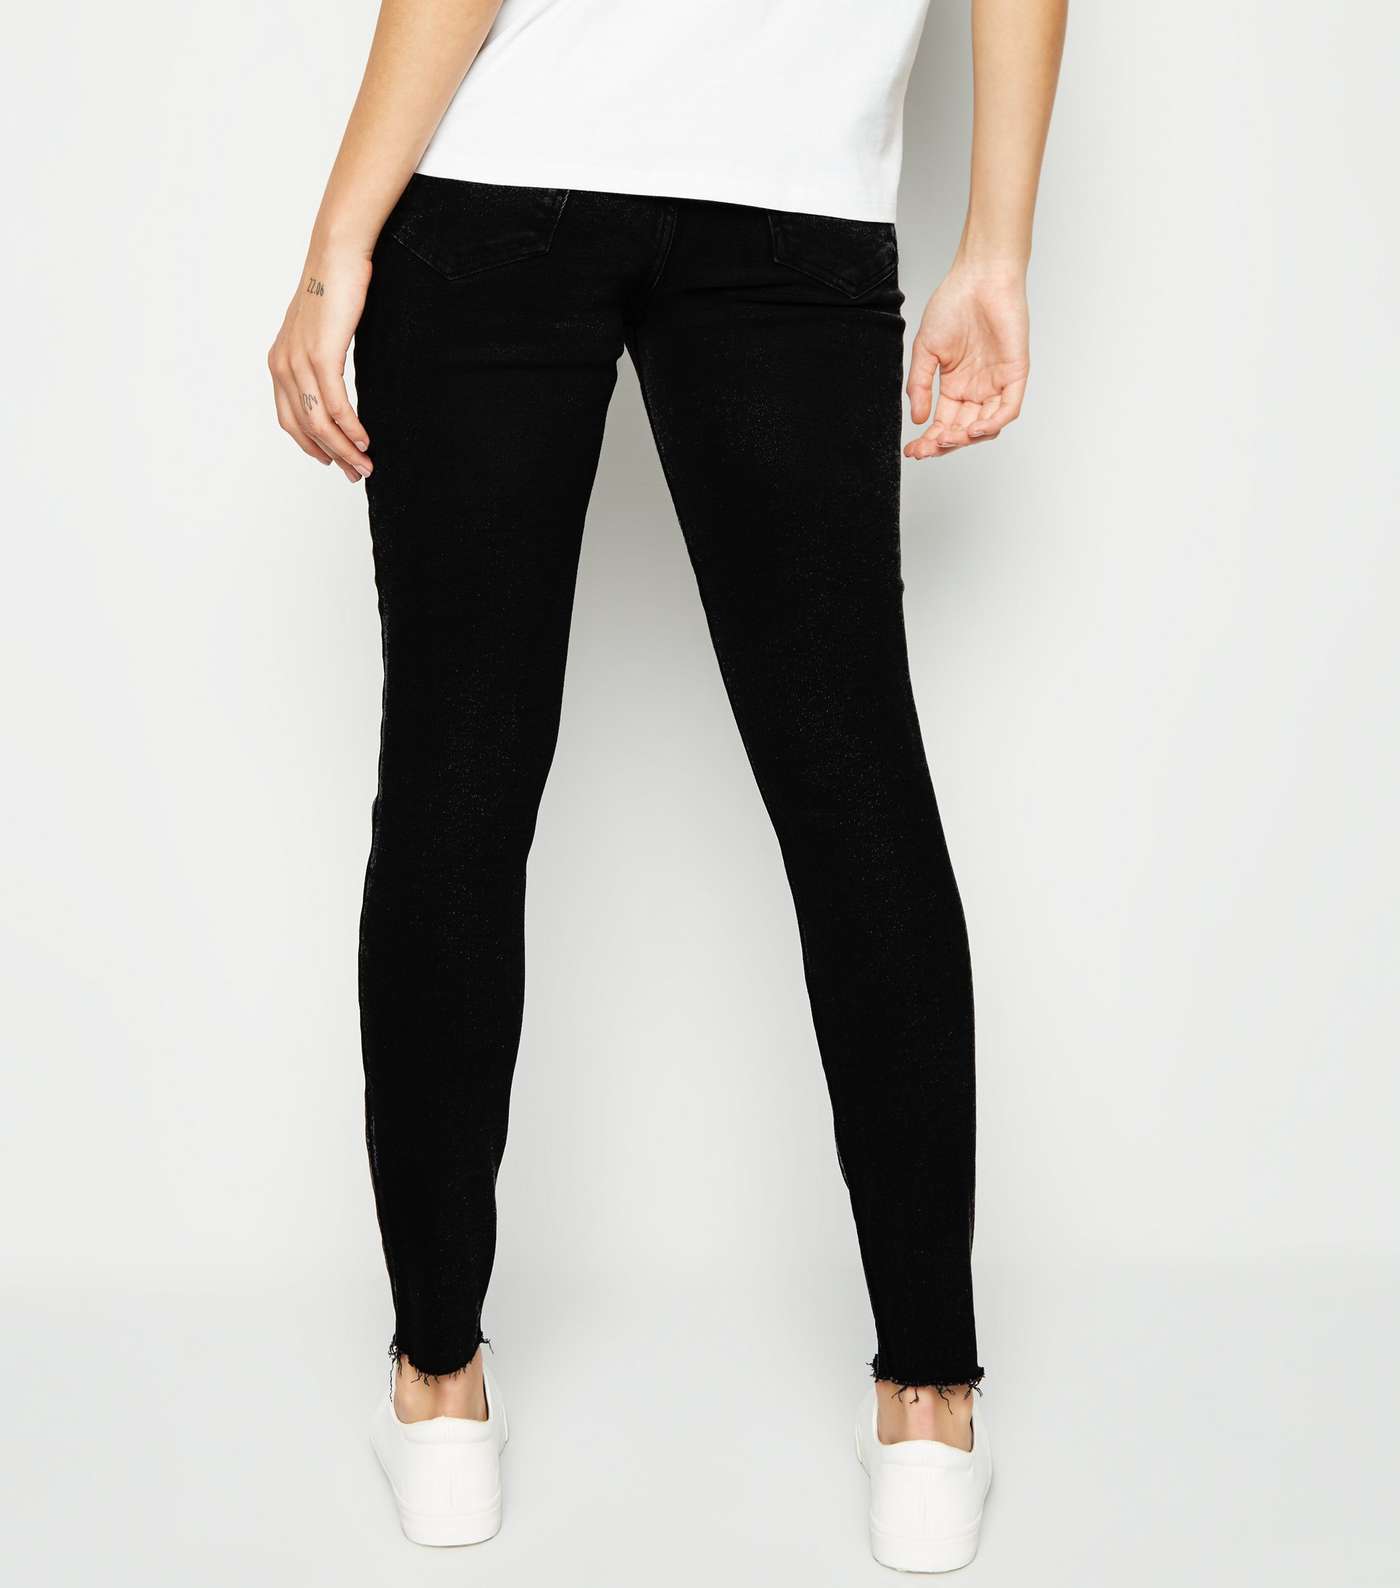 Maternity Black Ripped Knee Over Bump Skinny Jeans Image 3